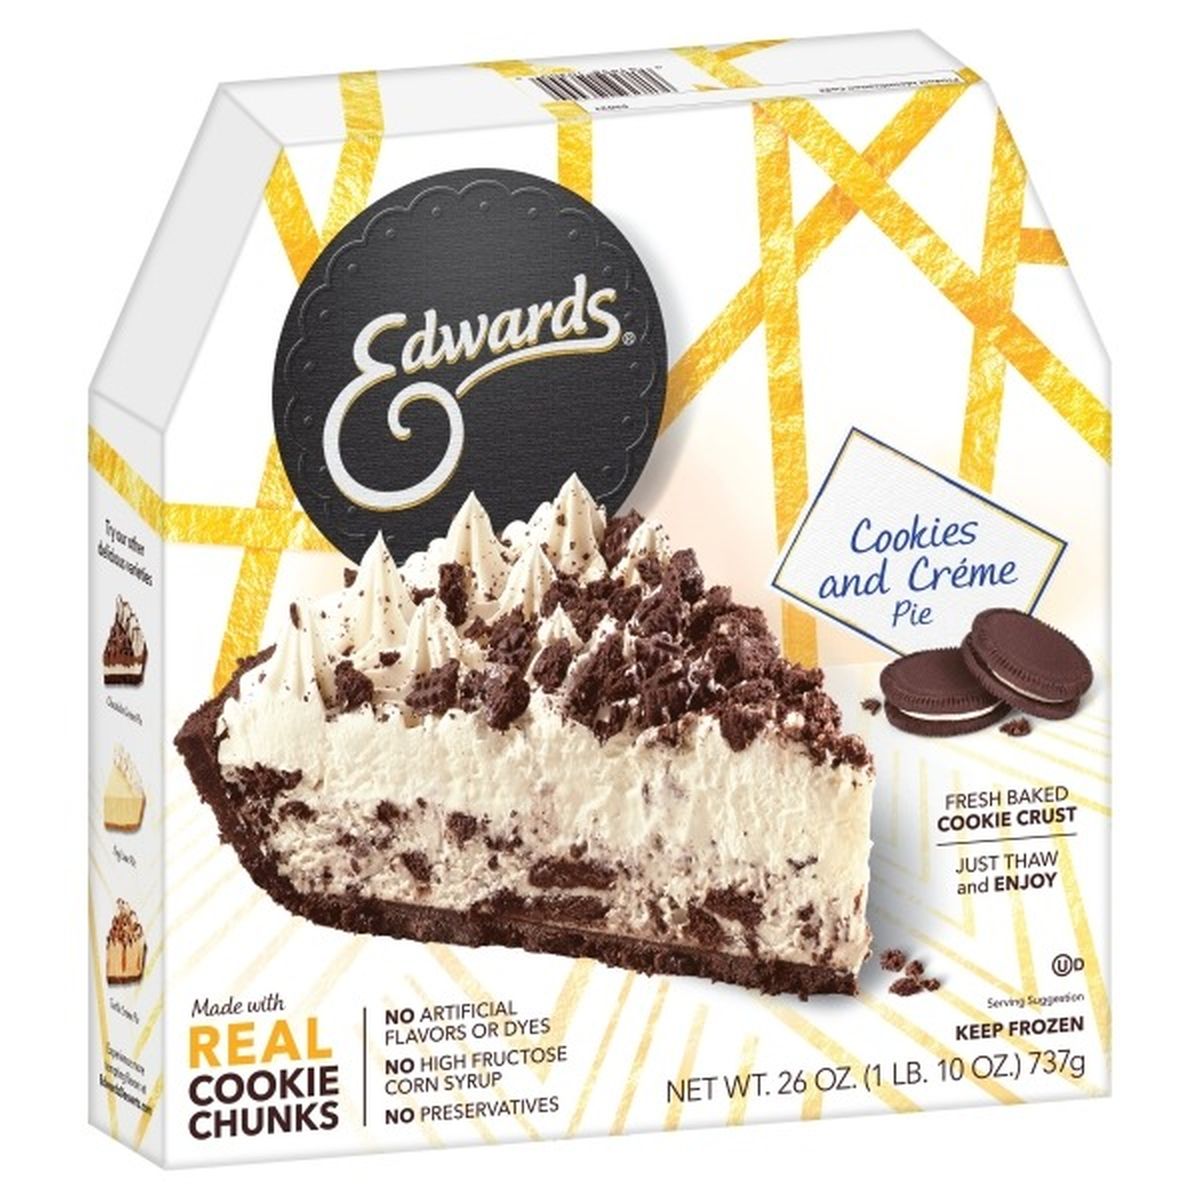 Calories in Edwards Pie, Cookies and Creme